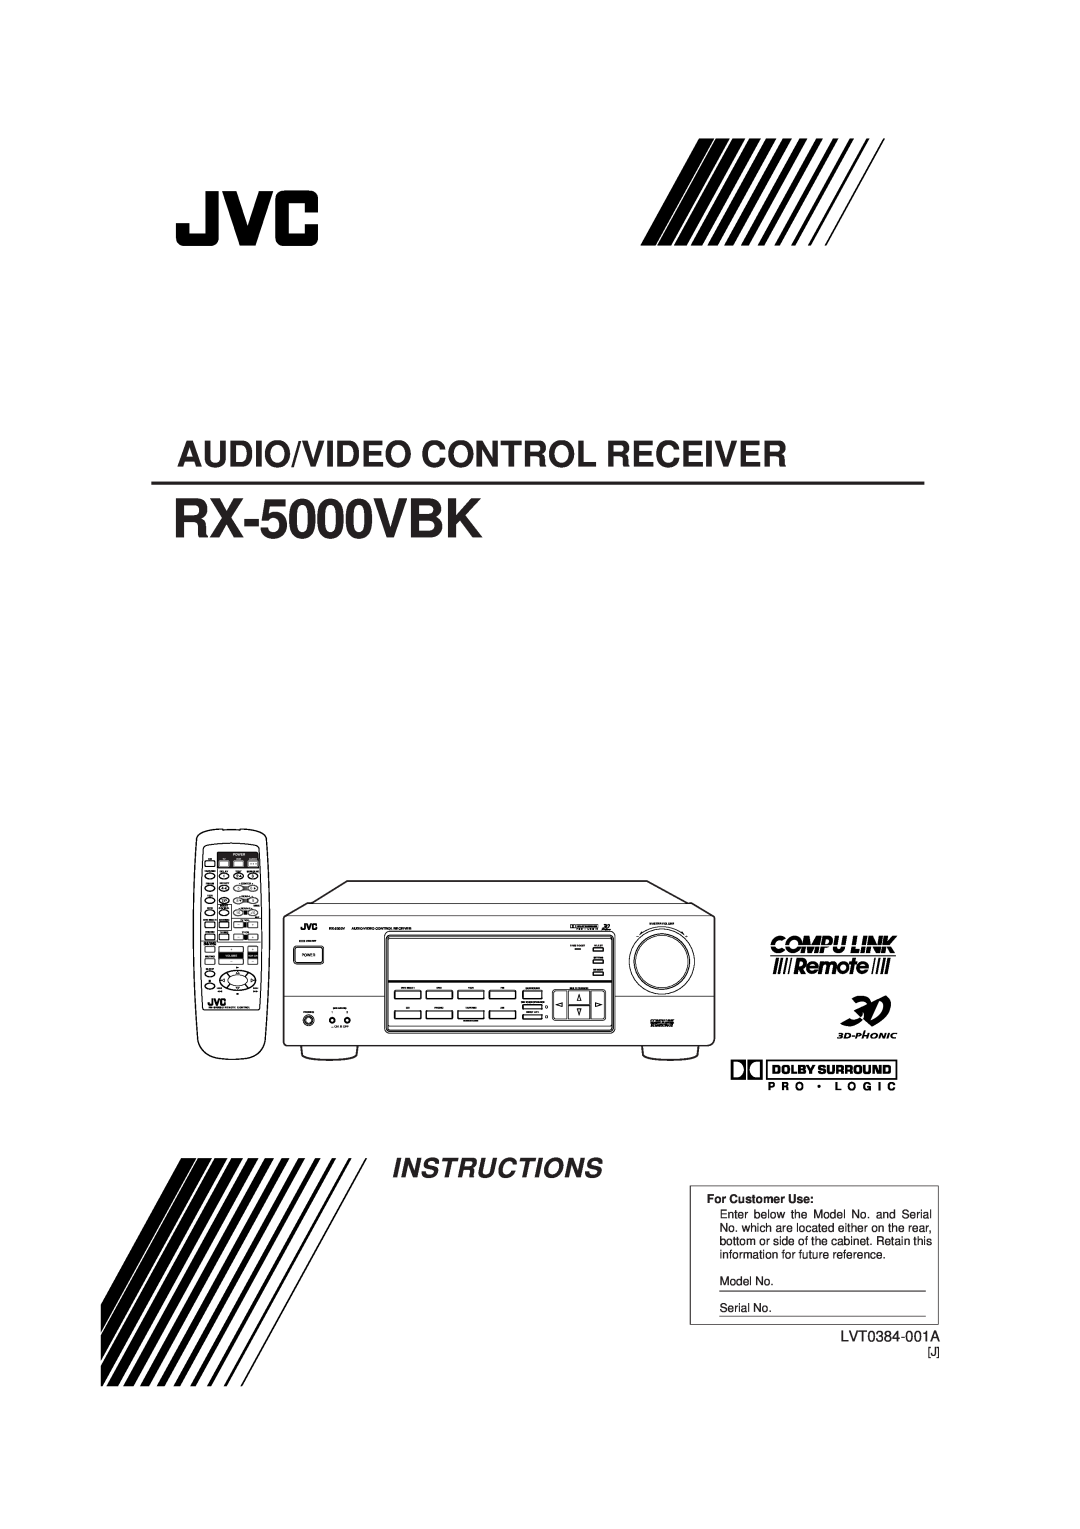 JVC RX-5000VBK manual Audio/Video Control Receiver, Instructions, LVT0384-001A, For Customer Use, Power 